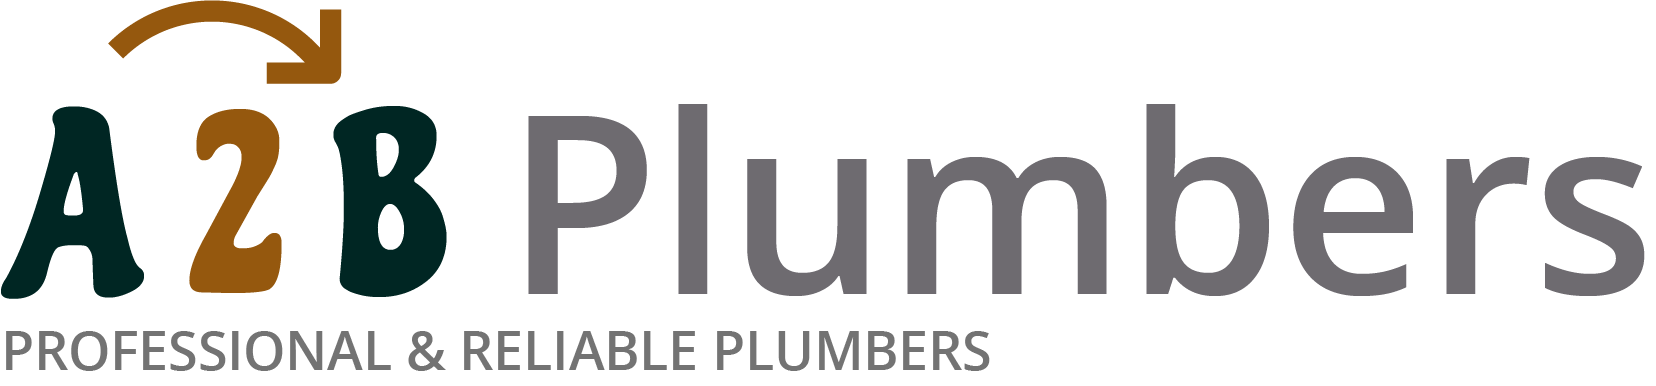 If you need a boiler installed, a radiator repaired or a leaking tap fixed, call us now - we provide services for properties in Burgess Hill and the local area.